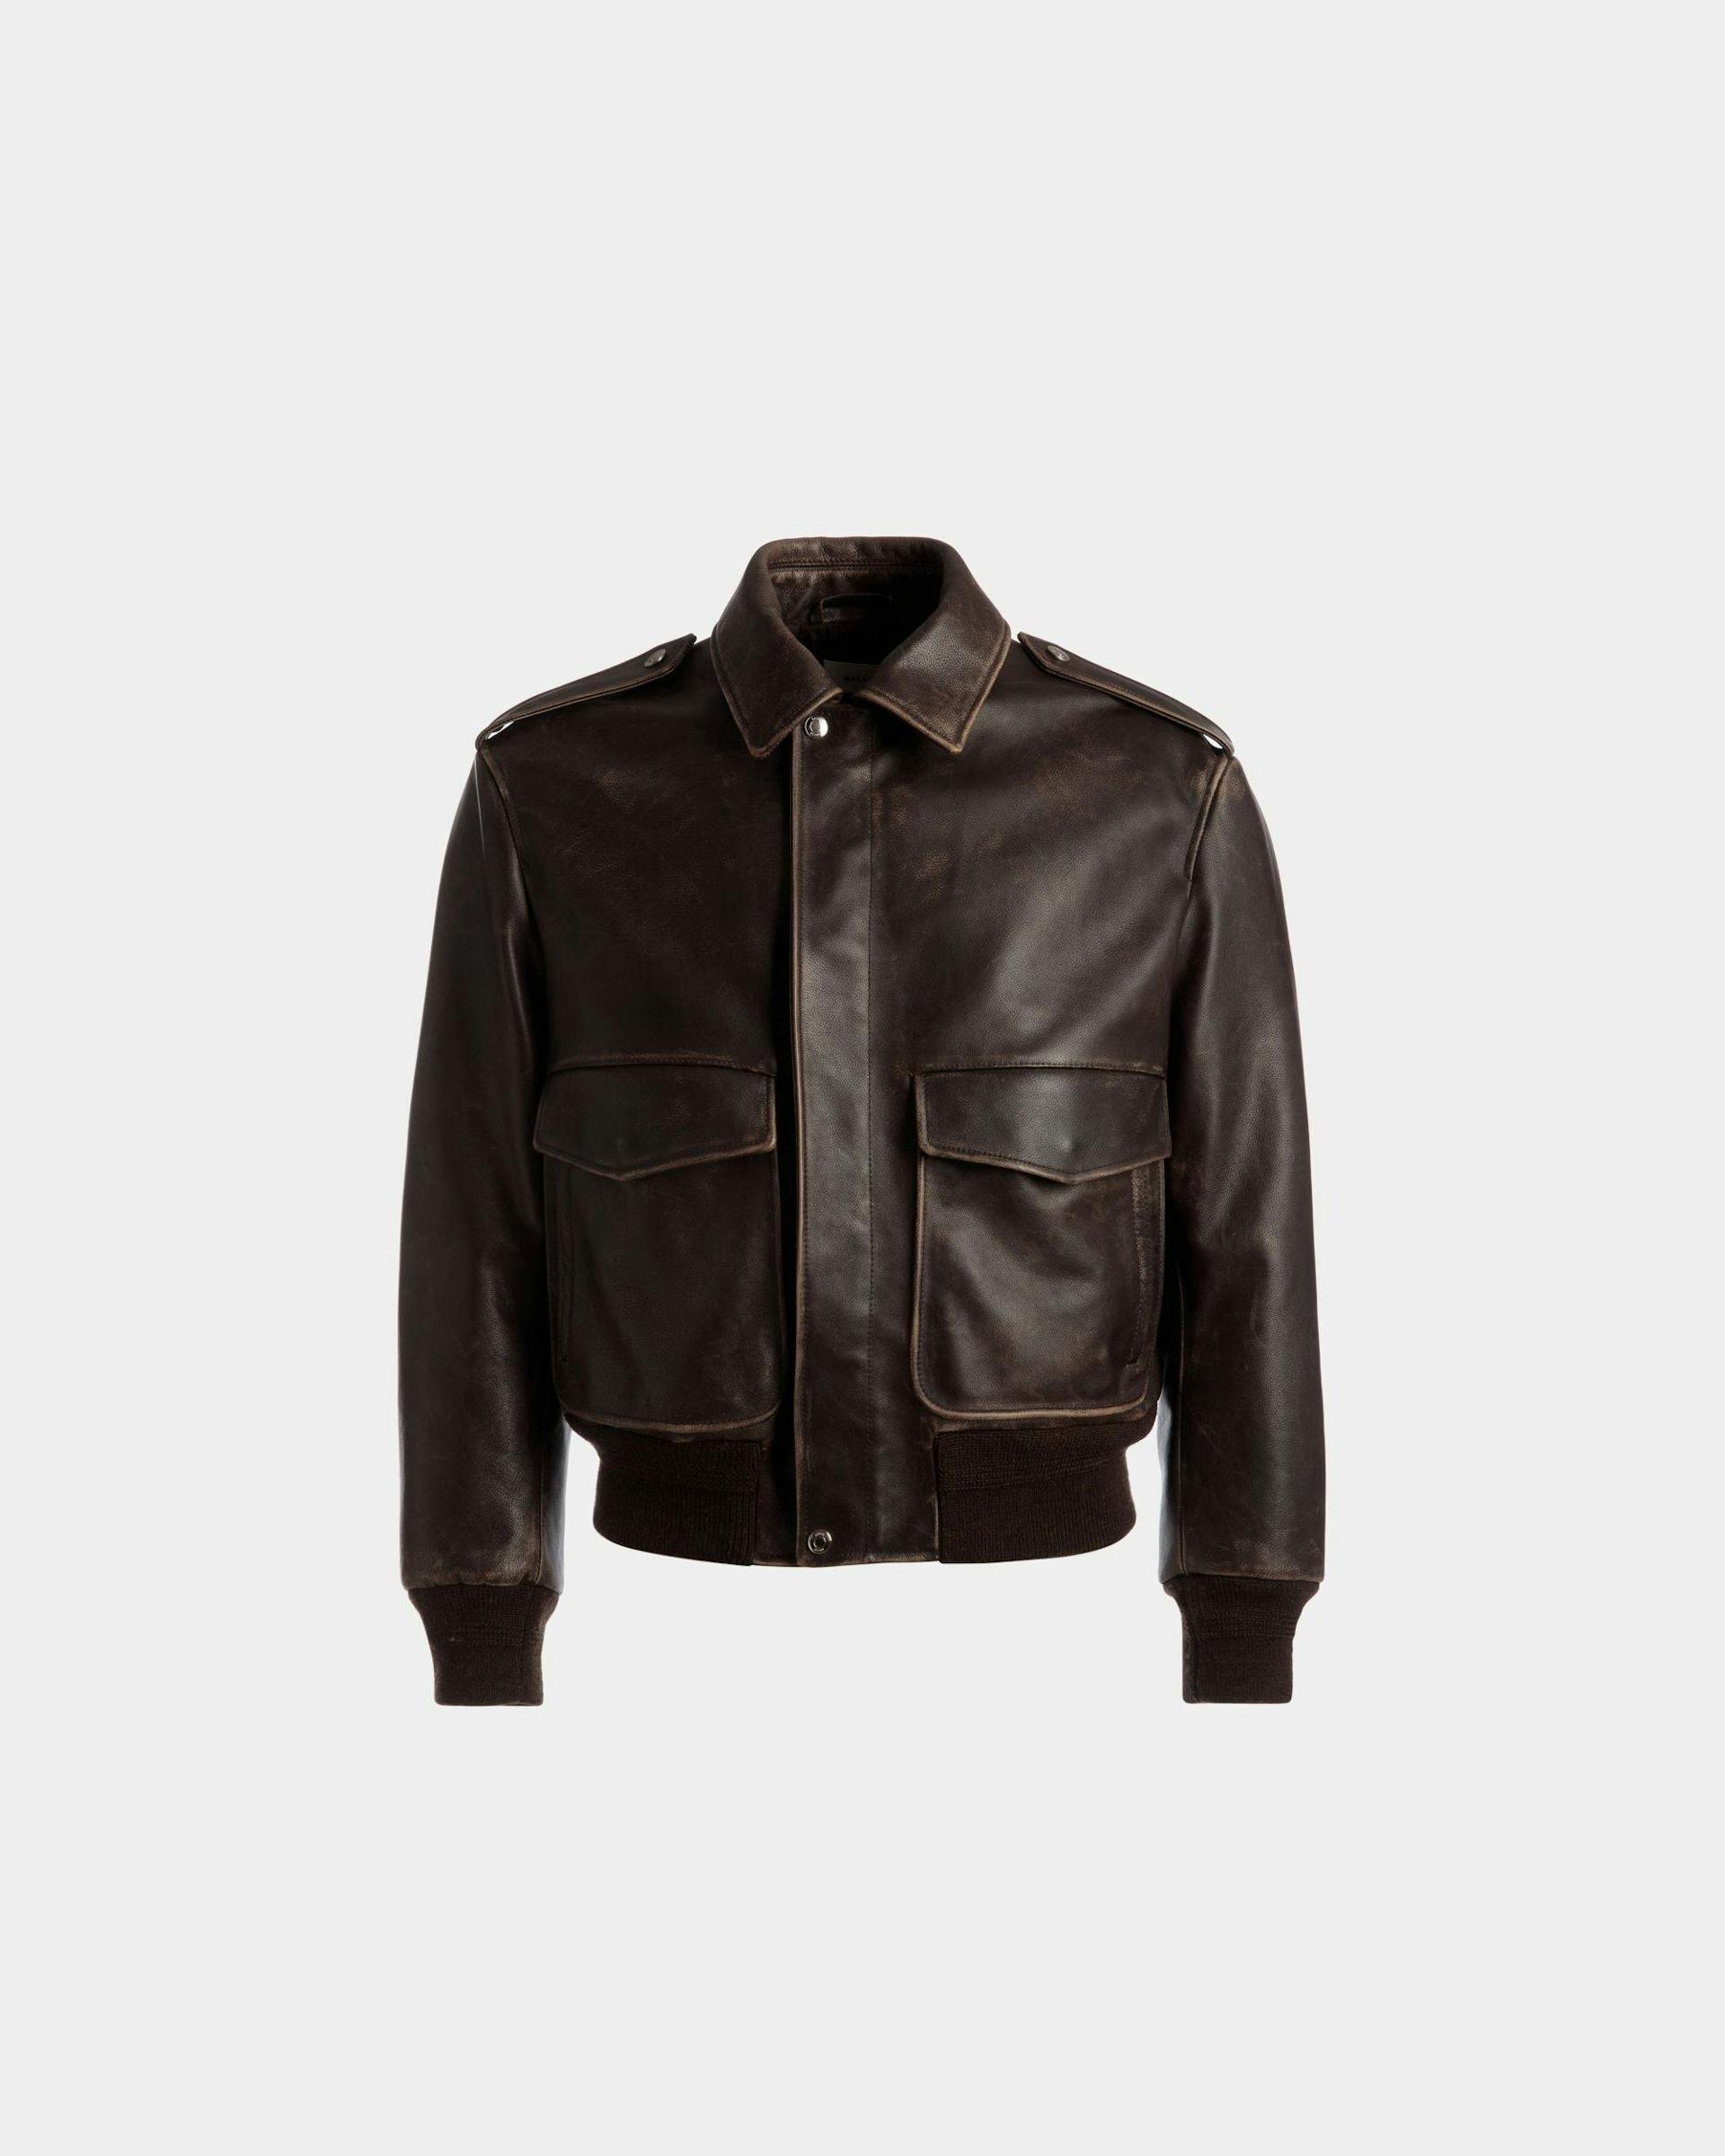 Men's Bomber Jacket In Brown Leather | Bally | Still Life Front